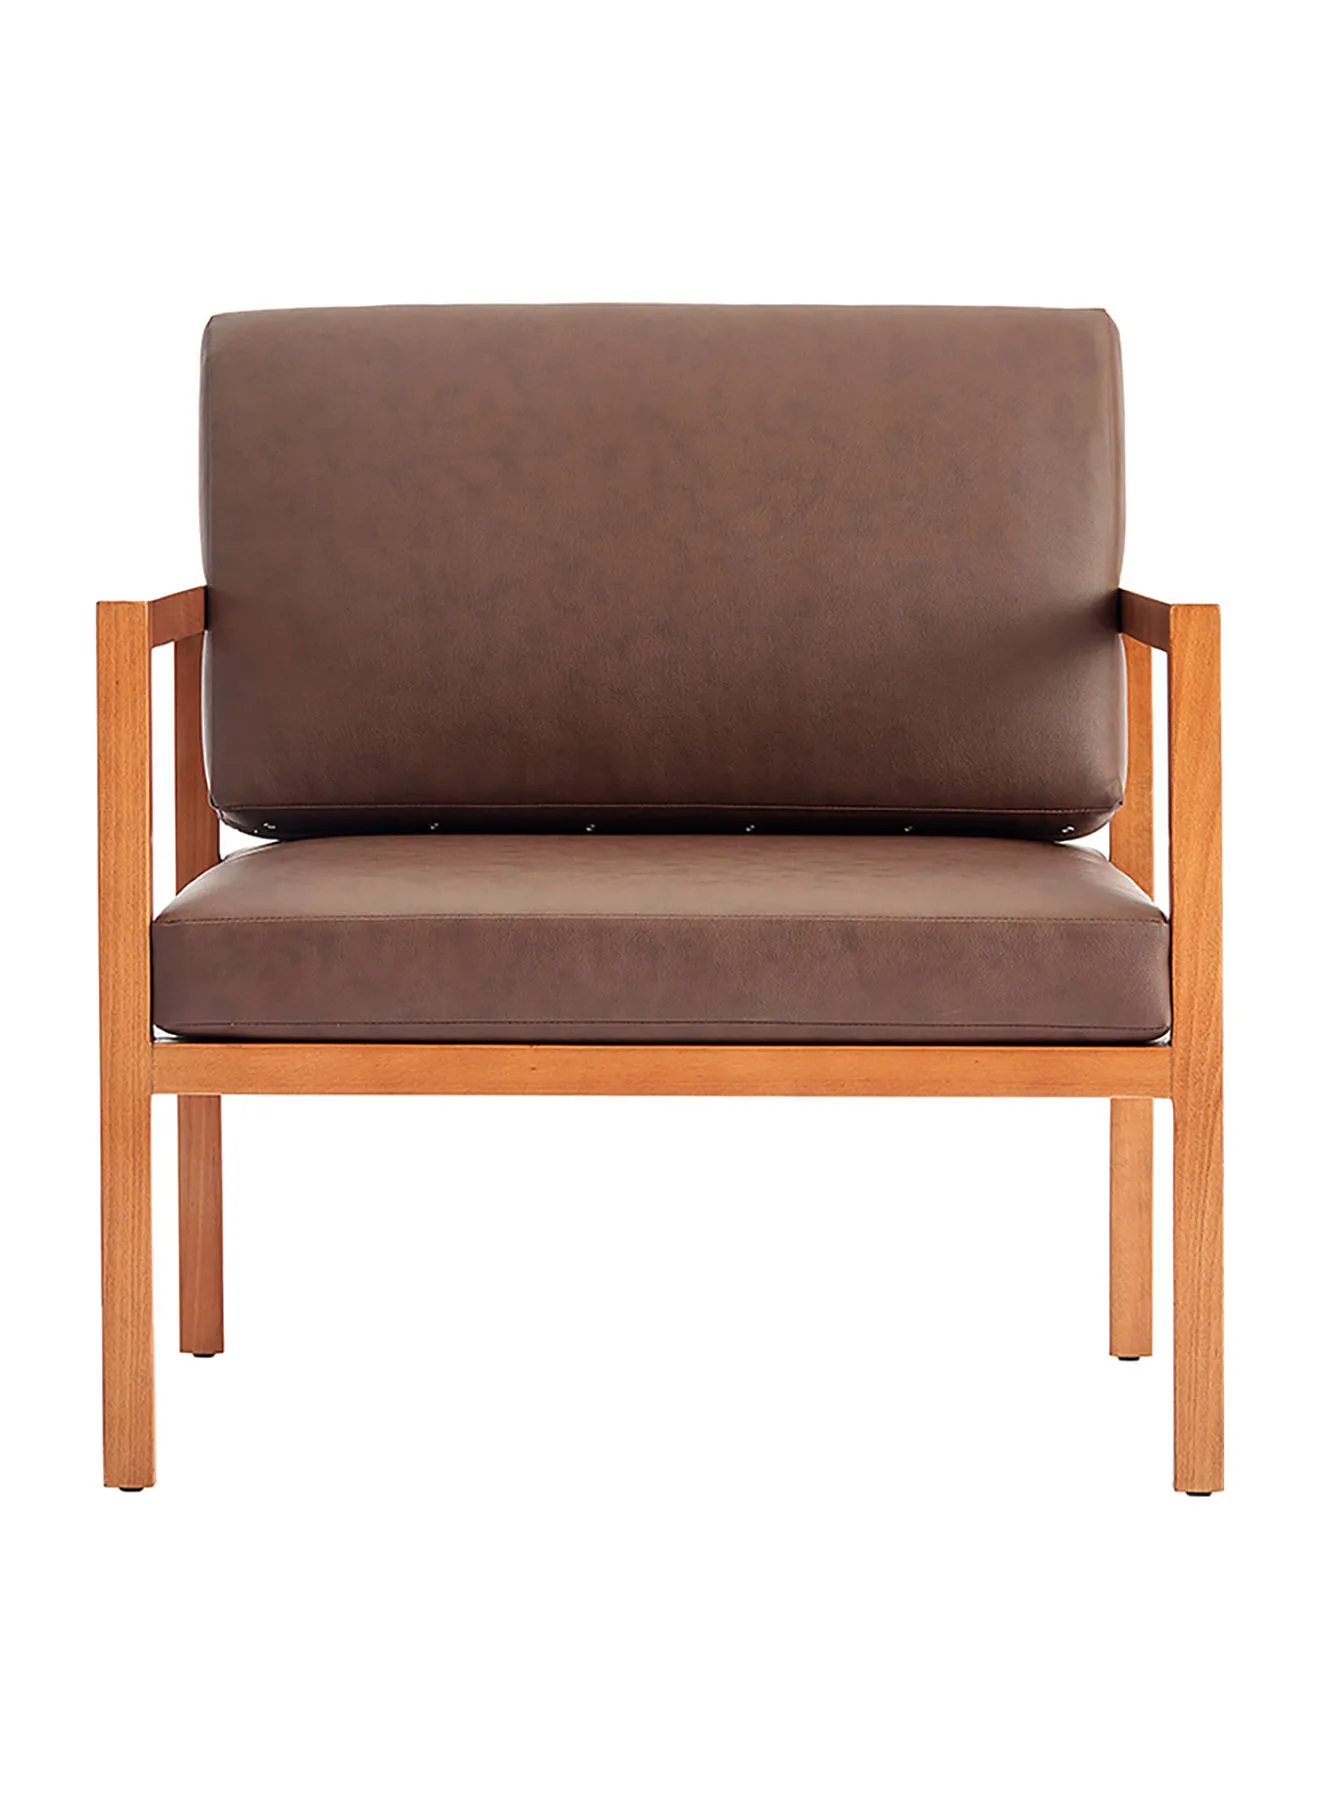 ebb & flow Armchair Luxurious - In Brown Wooden Chair Size 762 X 740 X 735